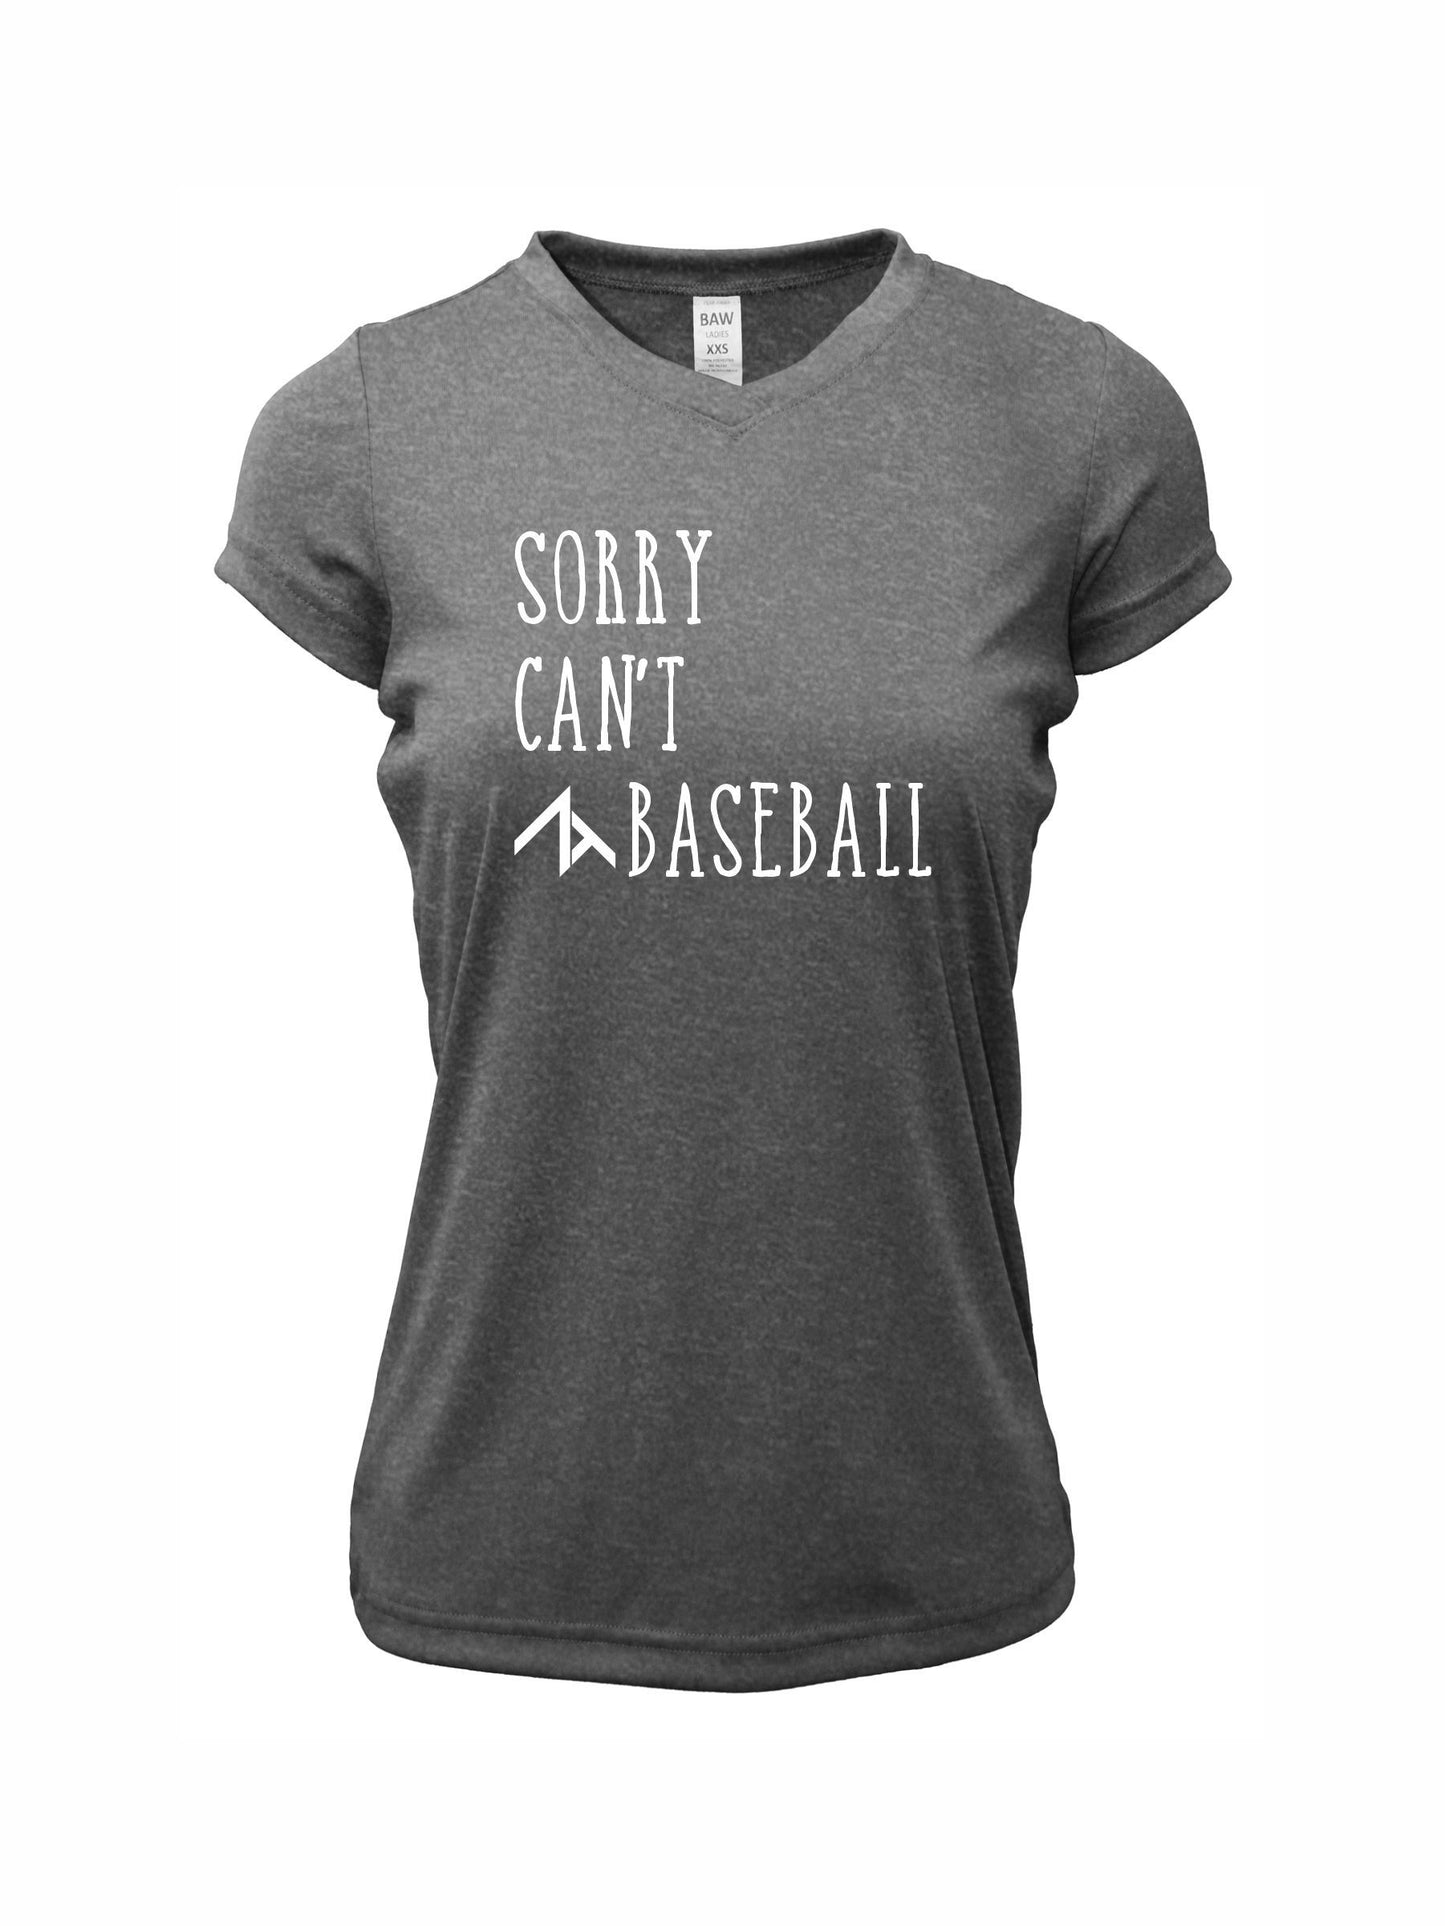 V-Neck Short Sleeve "SORRY CAN'T" Cotton T-shirt